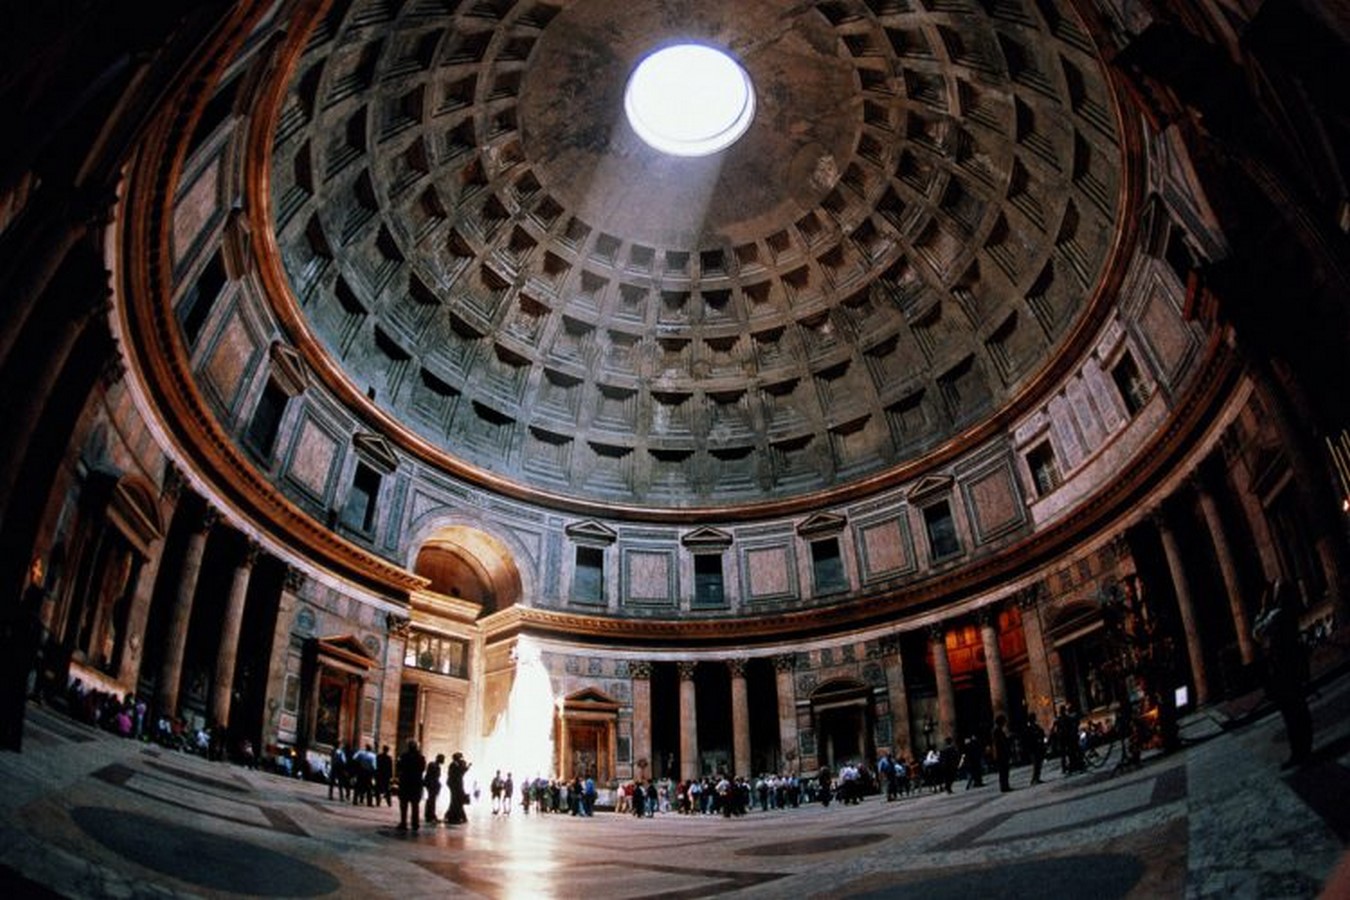 Ancient Architecture in Rome - The Pantheon